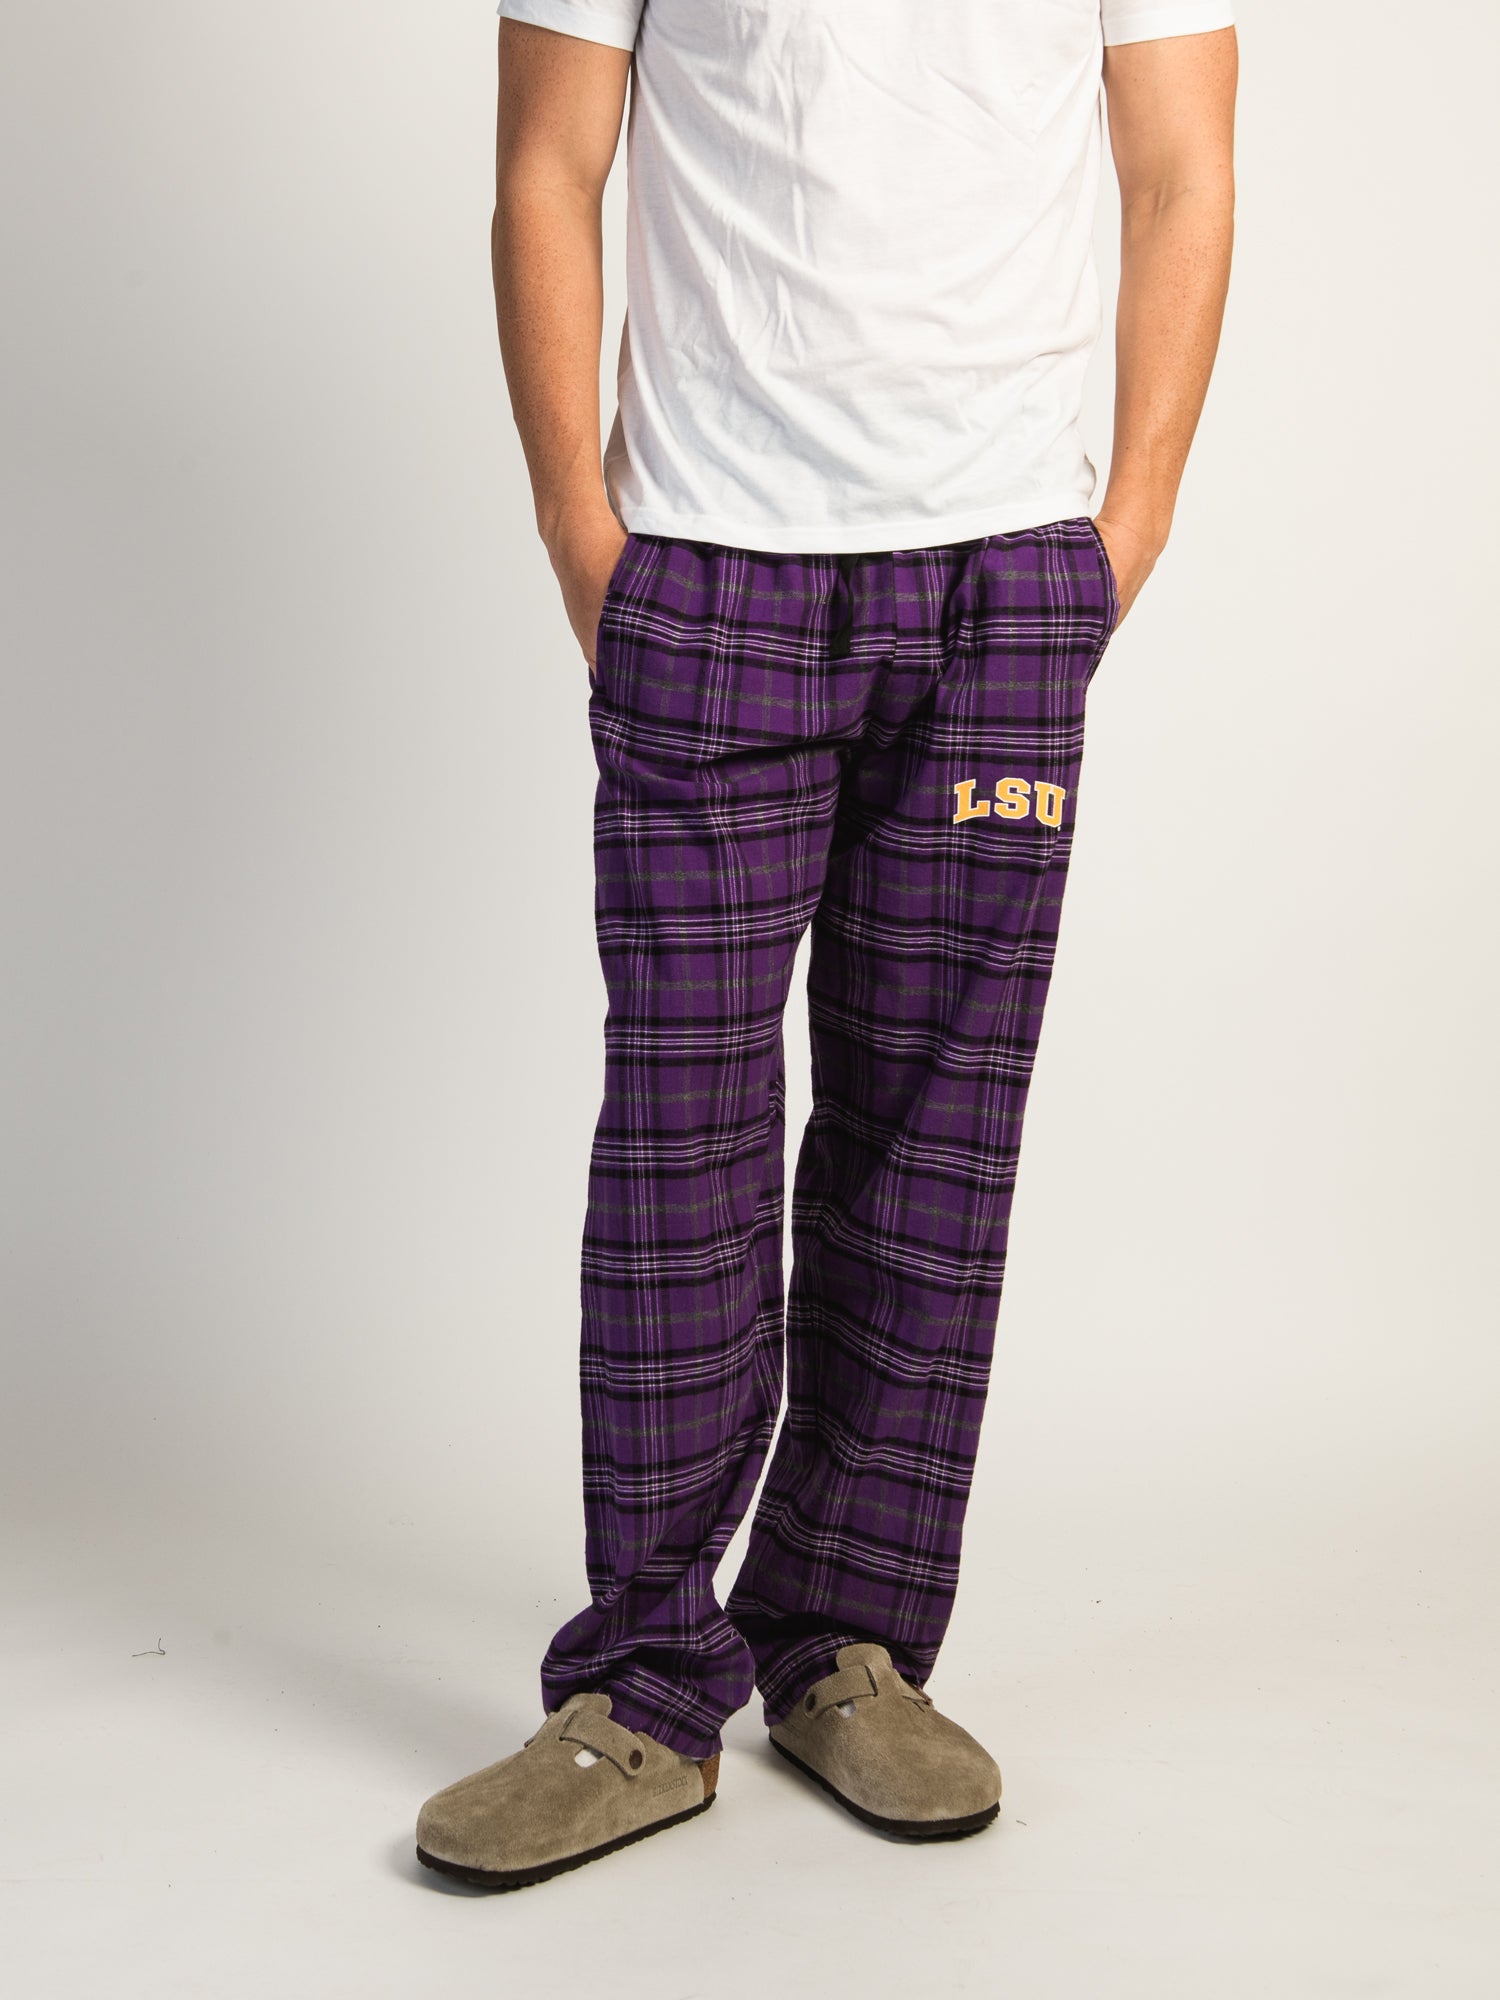 RUSSELL MICHIGAN STATE FLANNEL PANT